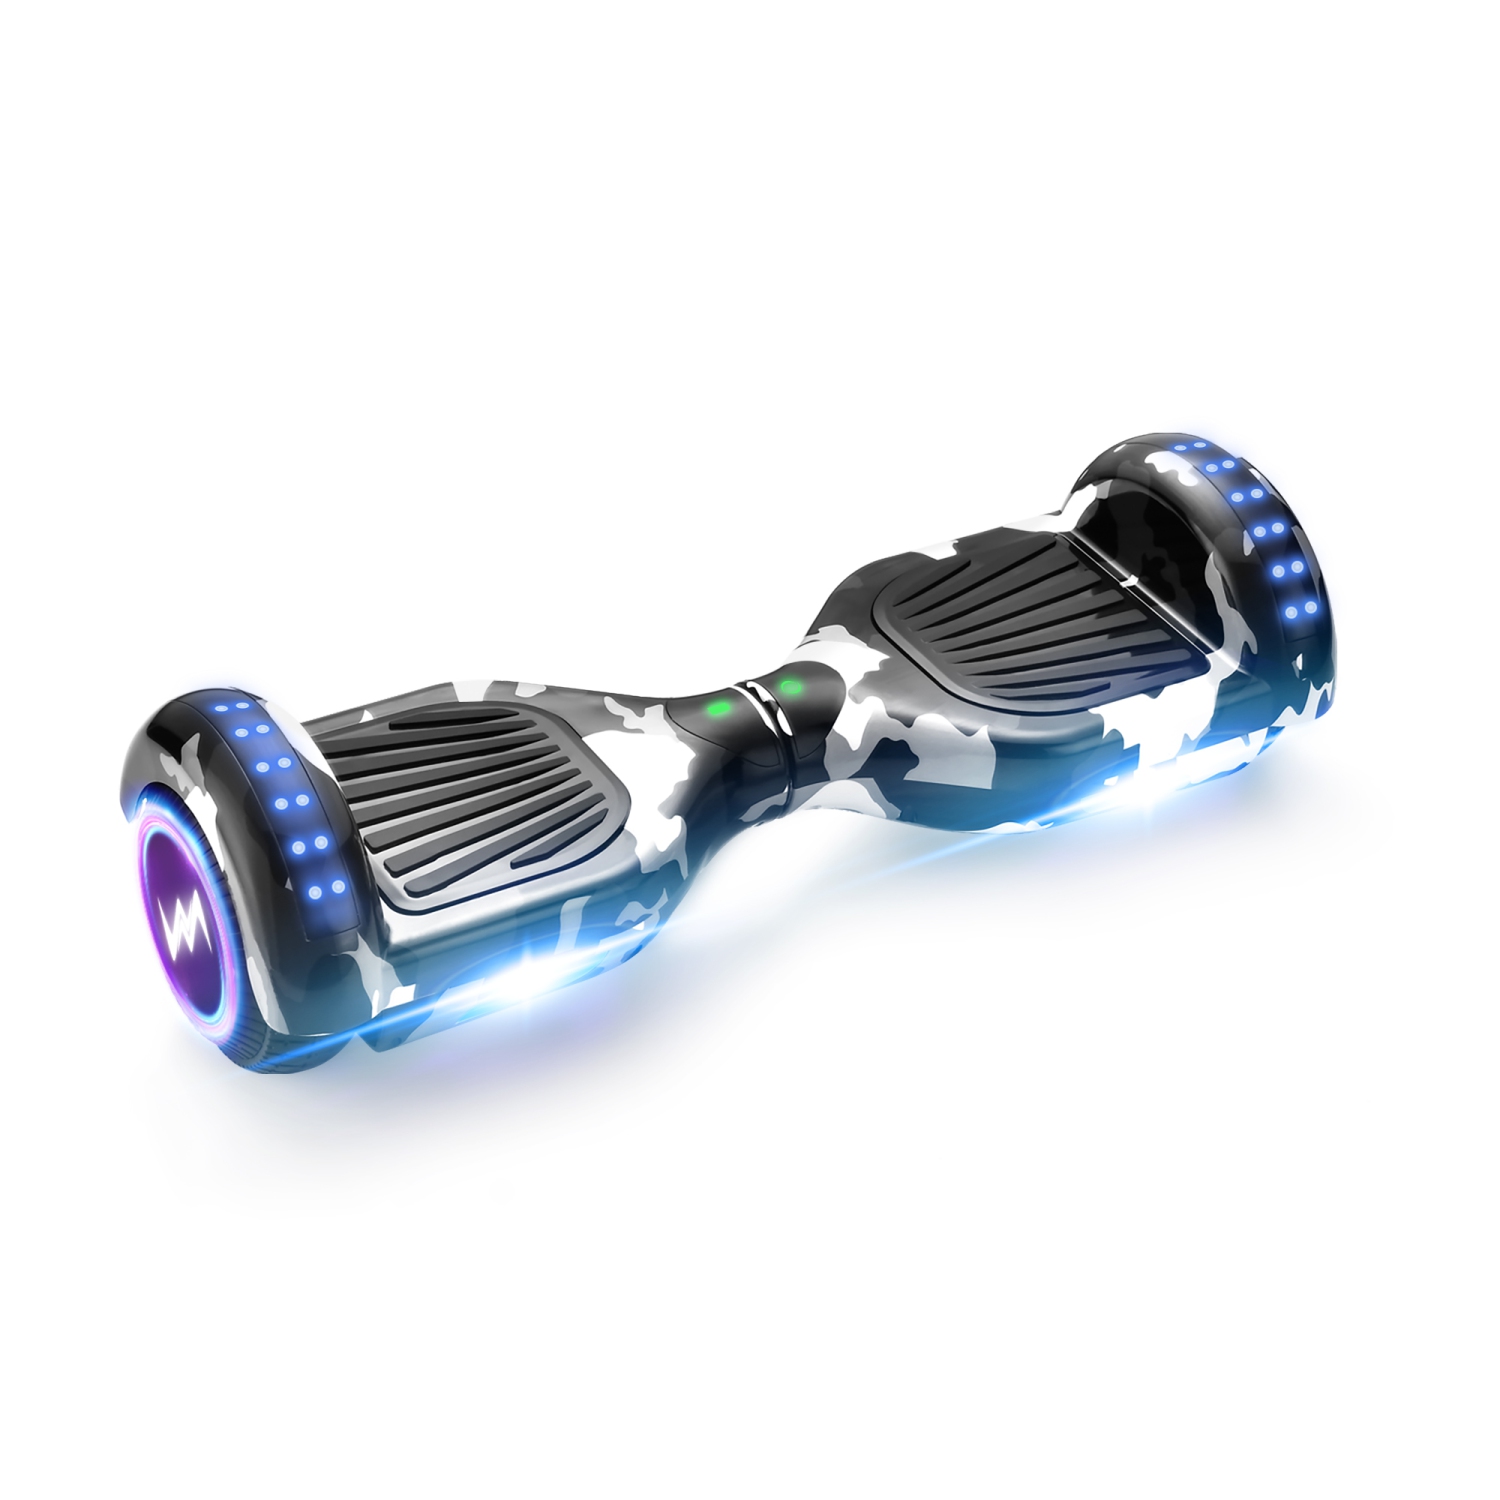 WEELMOTION CAMO Hoverboard with Music Speaker and LED Front Lights, Strap Lights, Shining Whees All Terrain 6.5" UL 2272 Certified Hoverboard with complimentary hover board bag